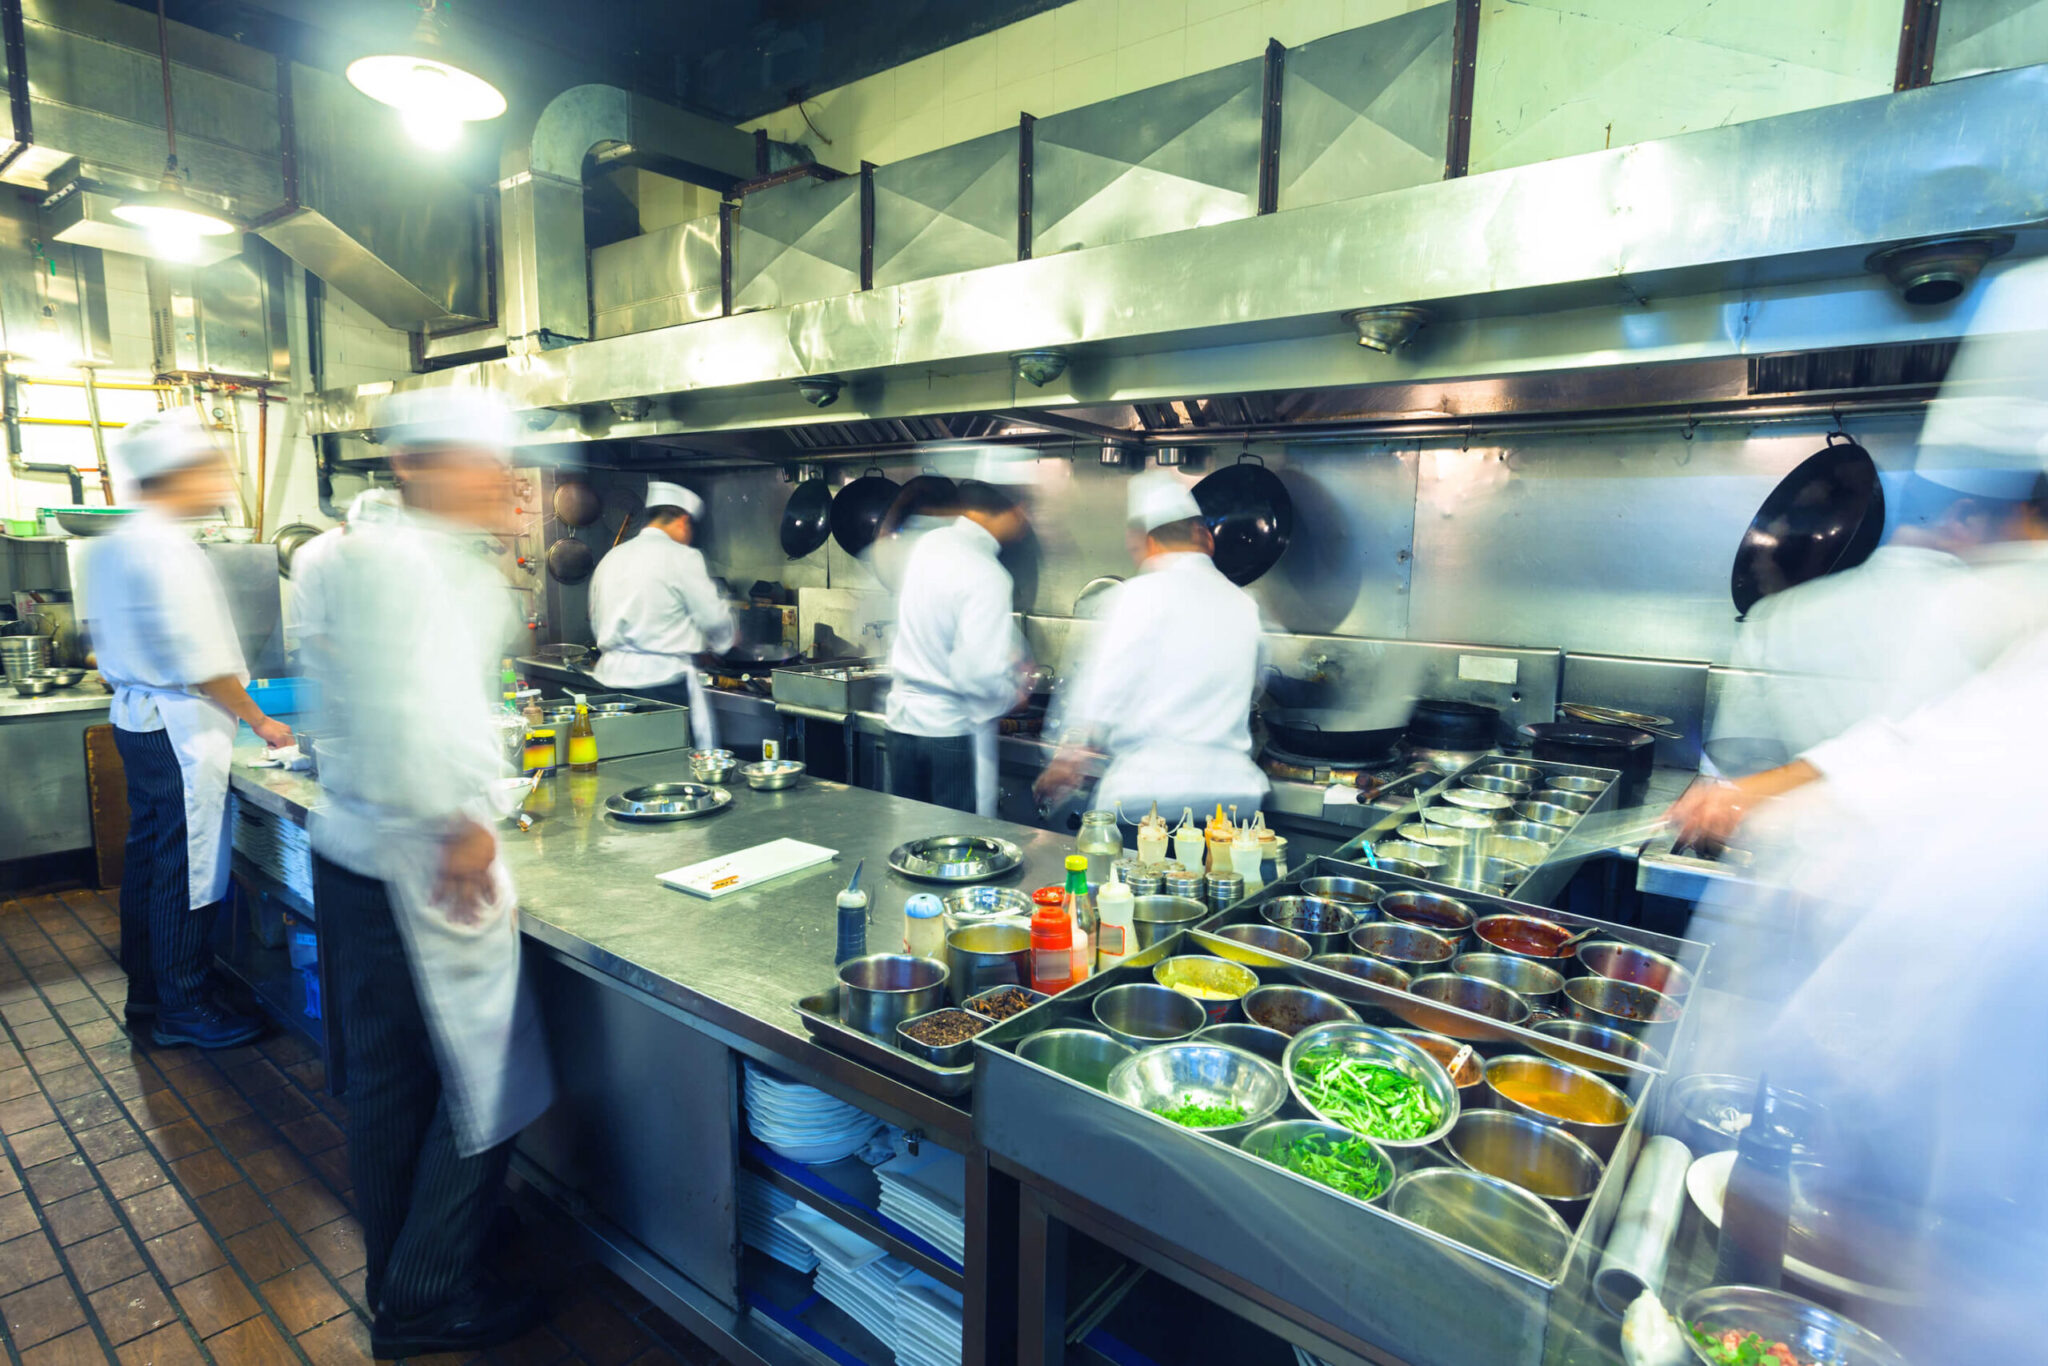 Range Hood Filters for your commercial kitchen